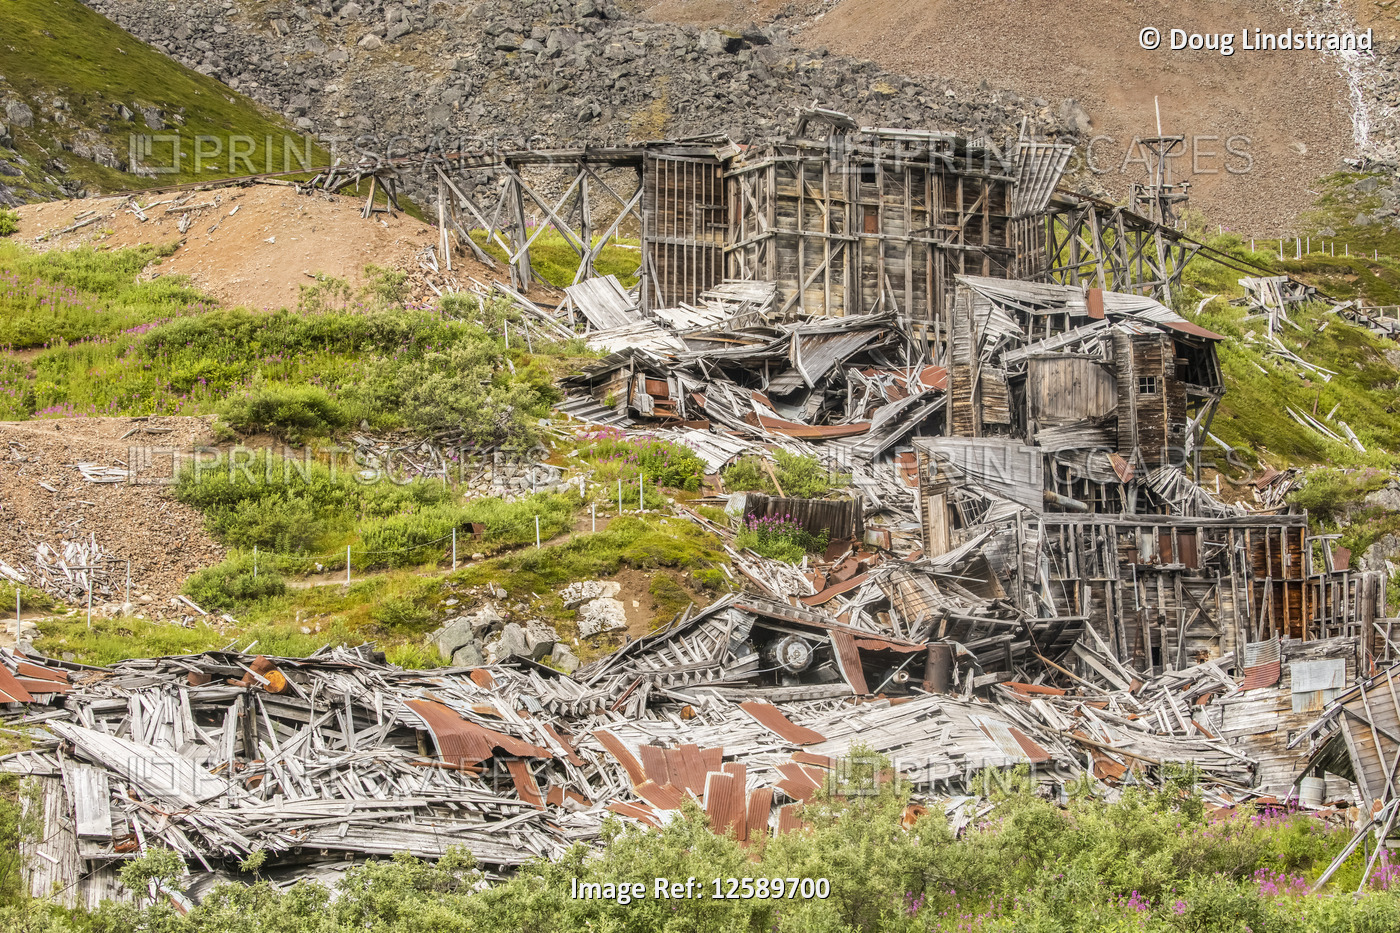 The remnants of the now abandoned Independence Mines still stand and the area ...